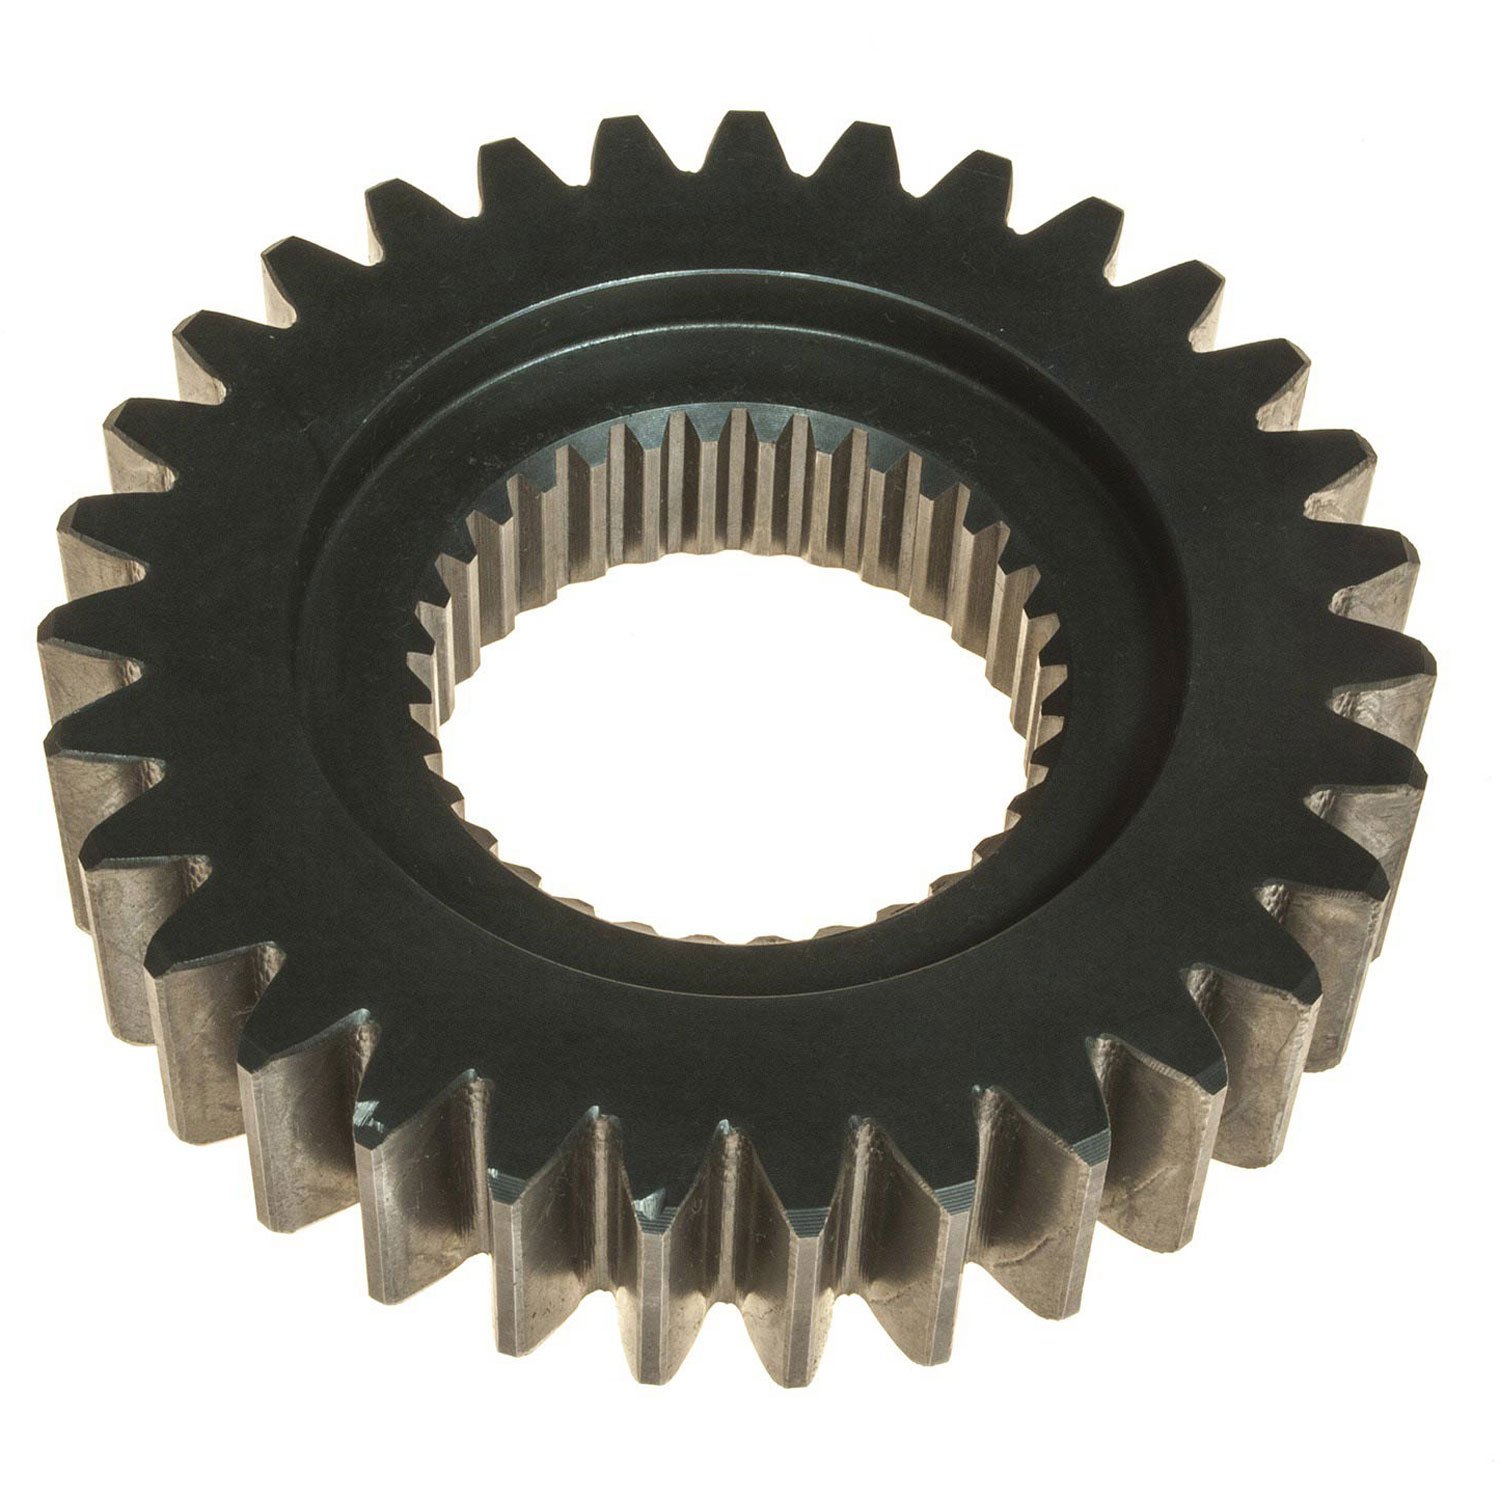 2nd Gear Cluster For Super T-10 Plus 2-Speed